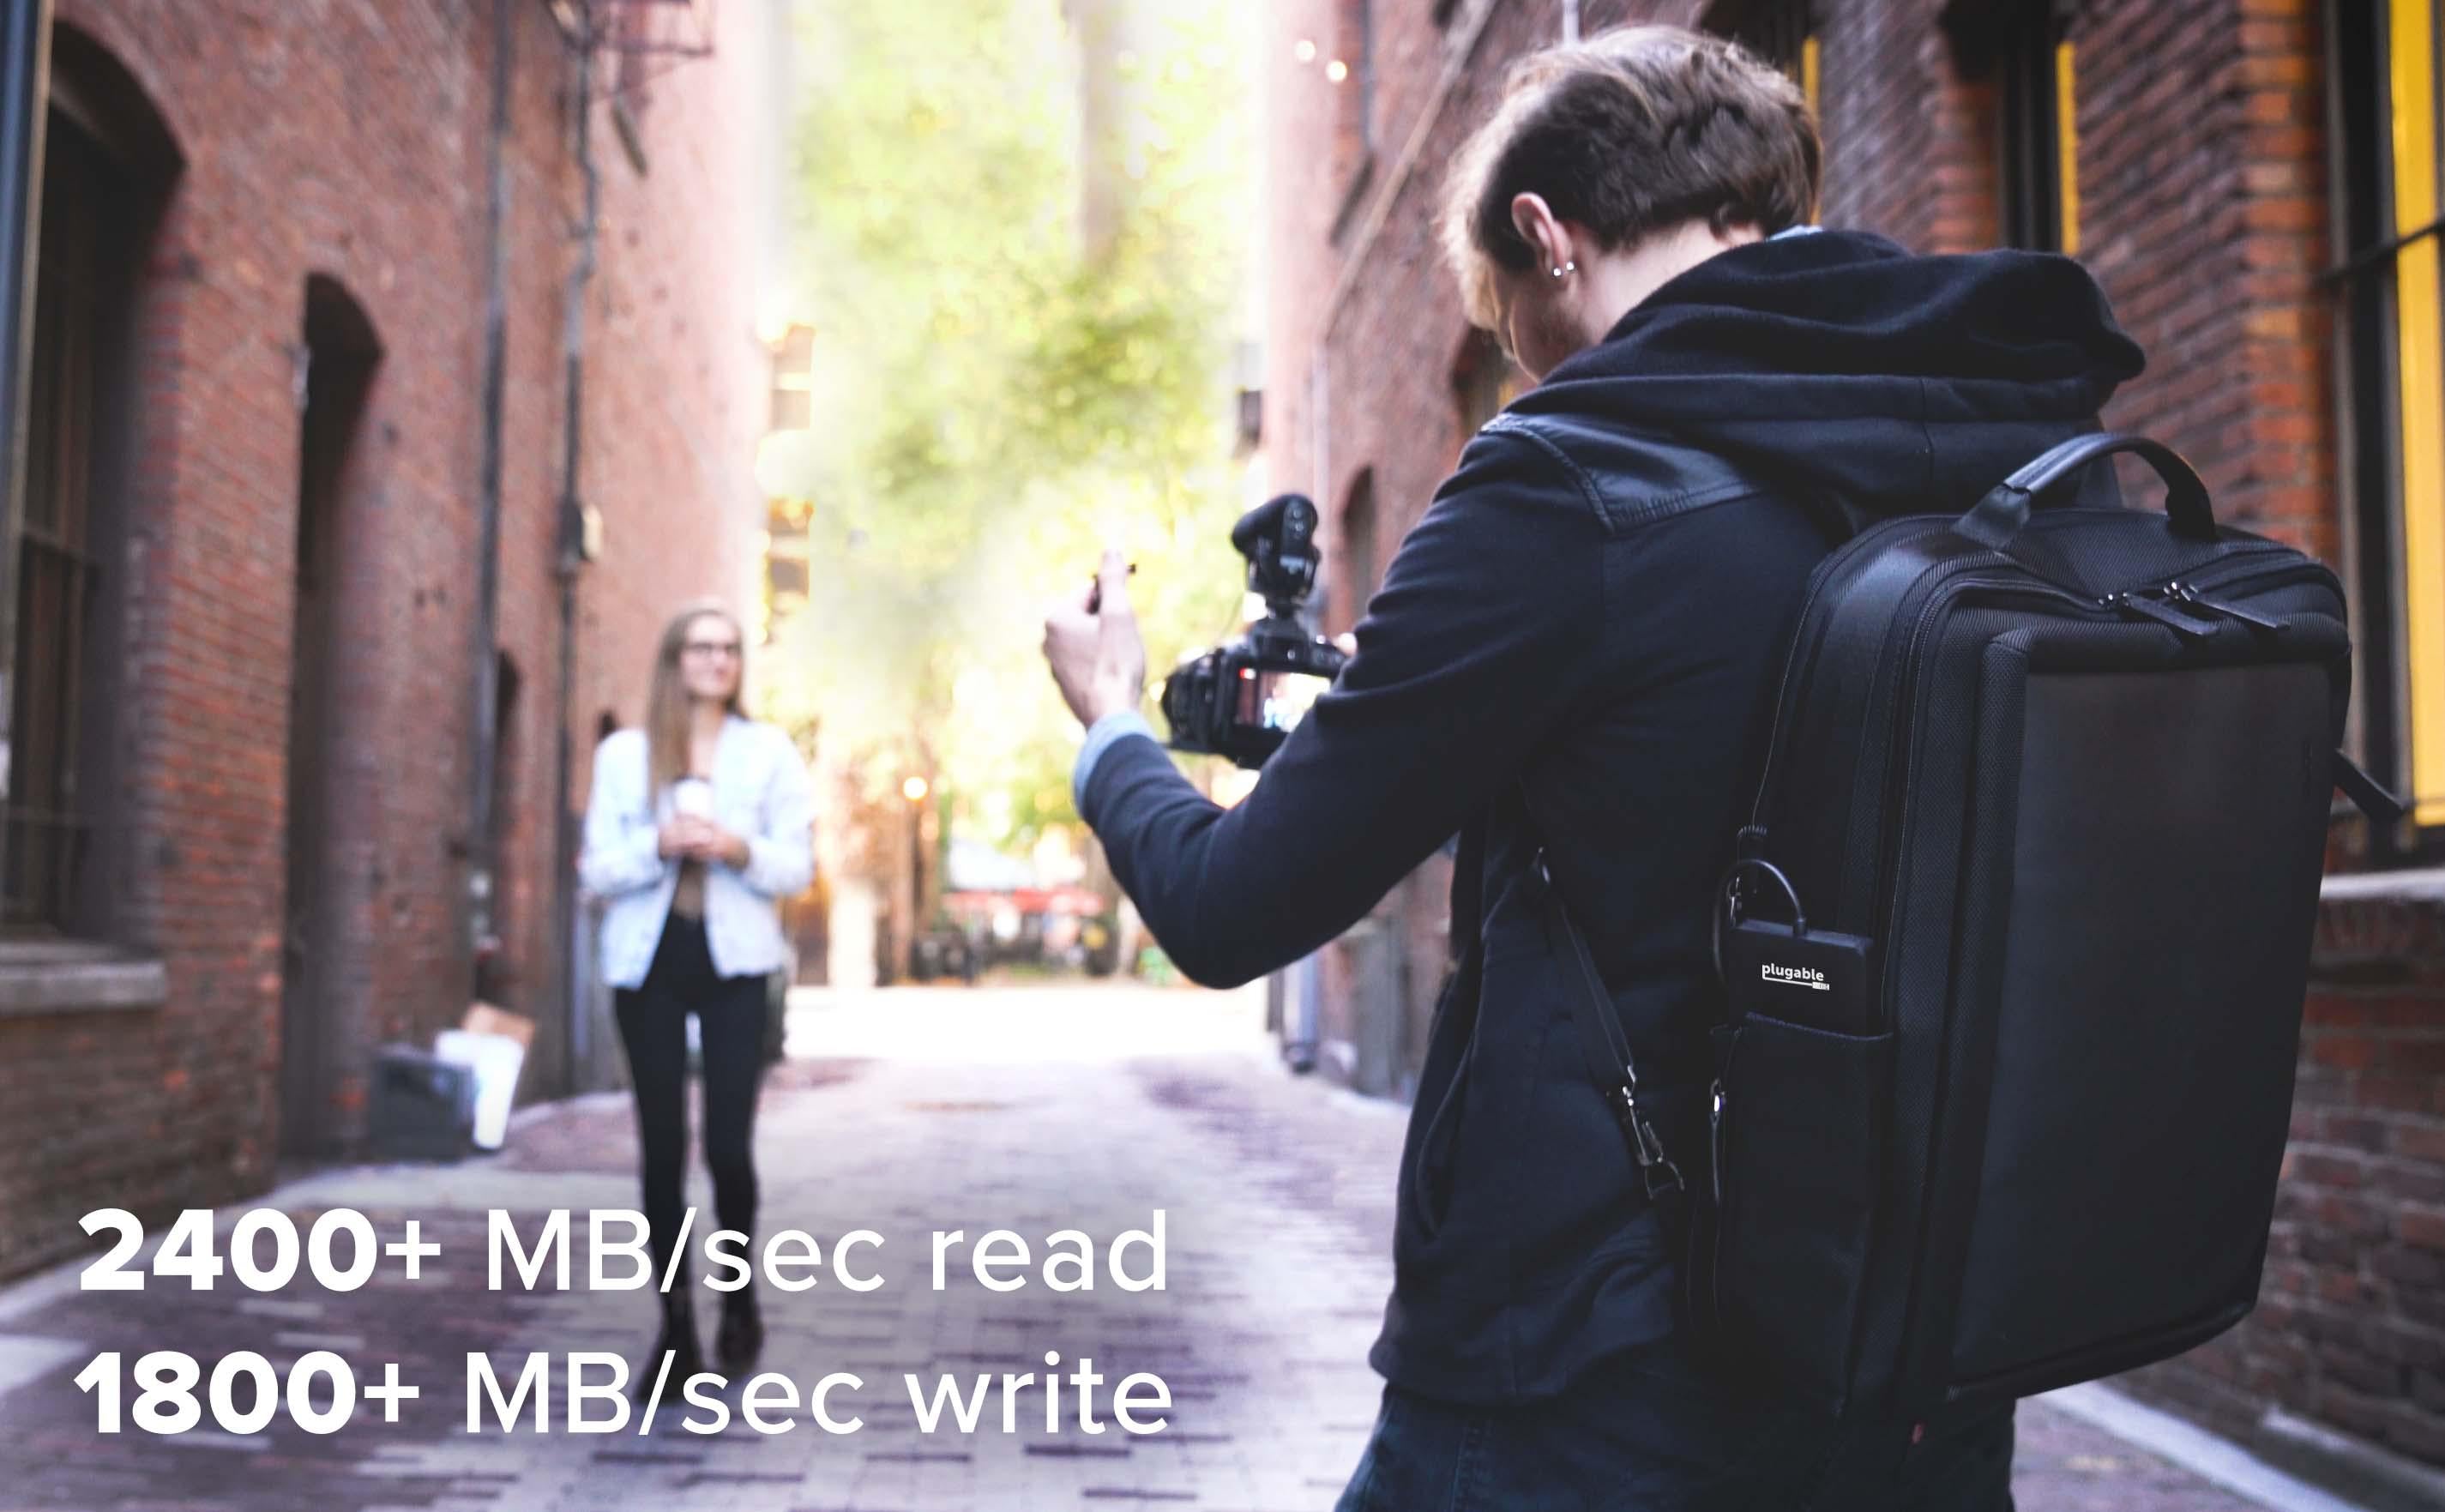 Image of someone taking a picture of their friend, with text that says 2400+ MB/sec read, 1800+ MB/sec write